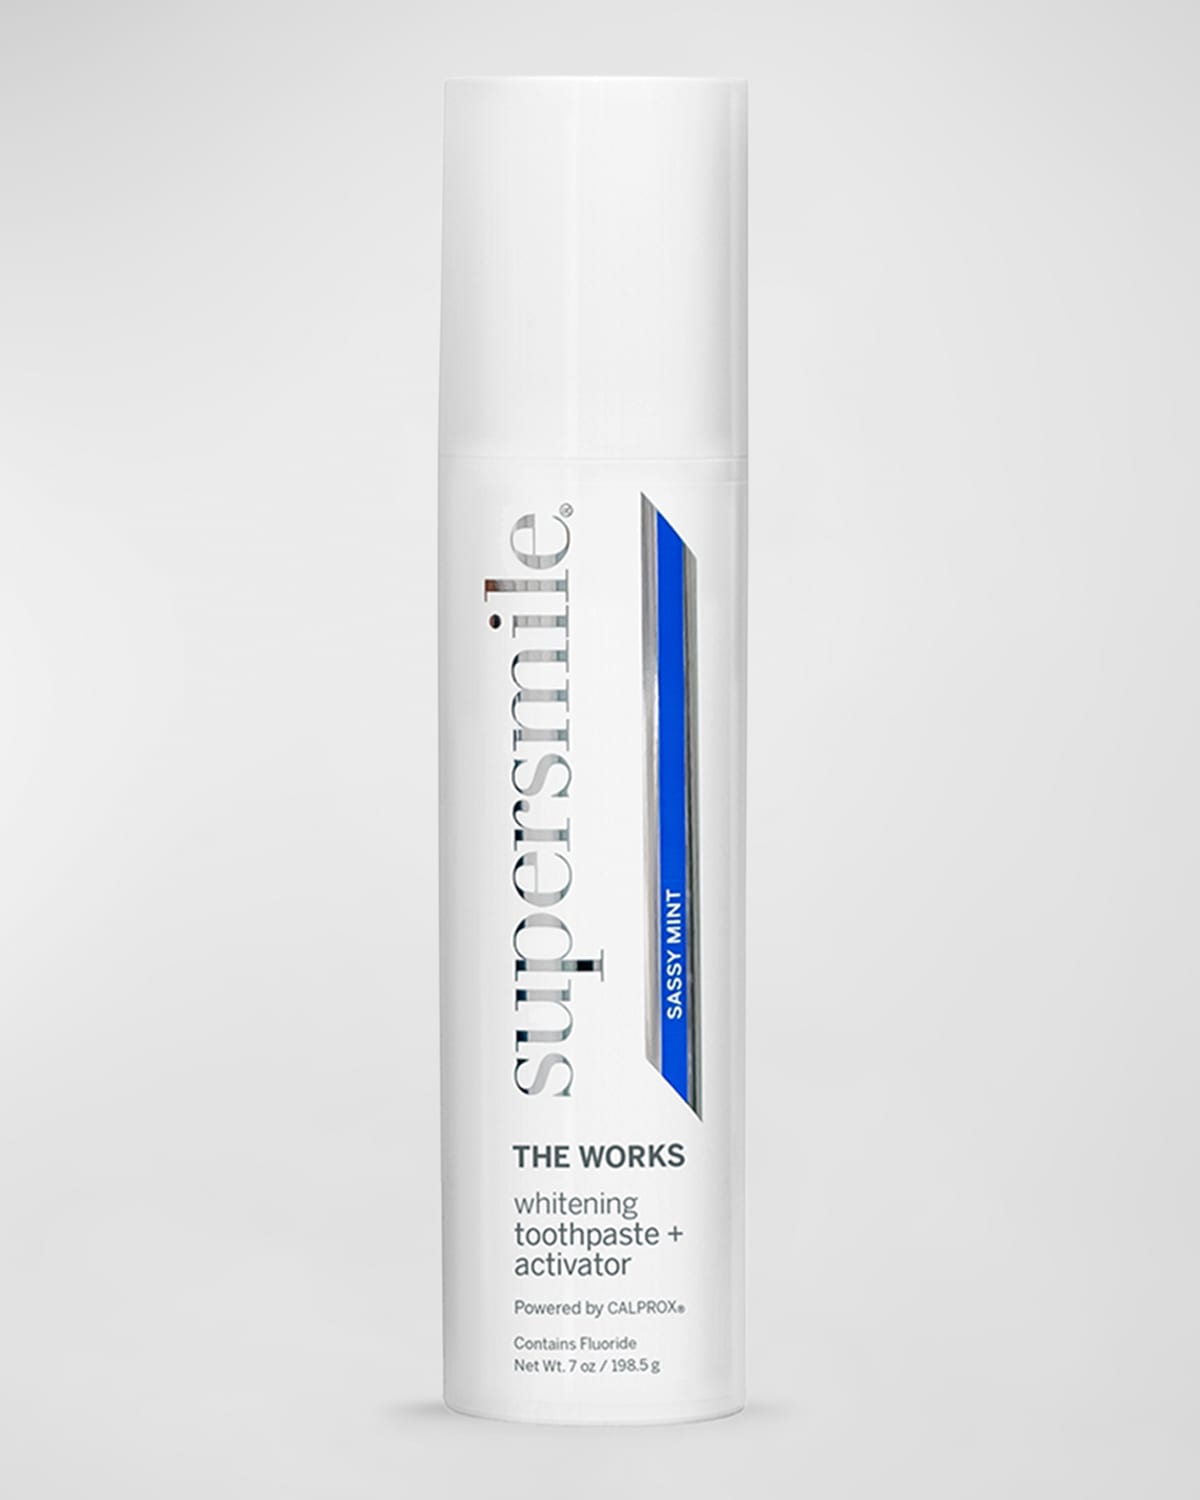 The Works Whitening Toothpaste + Activator, 7 oz.